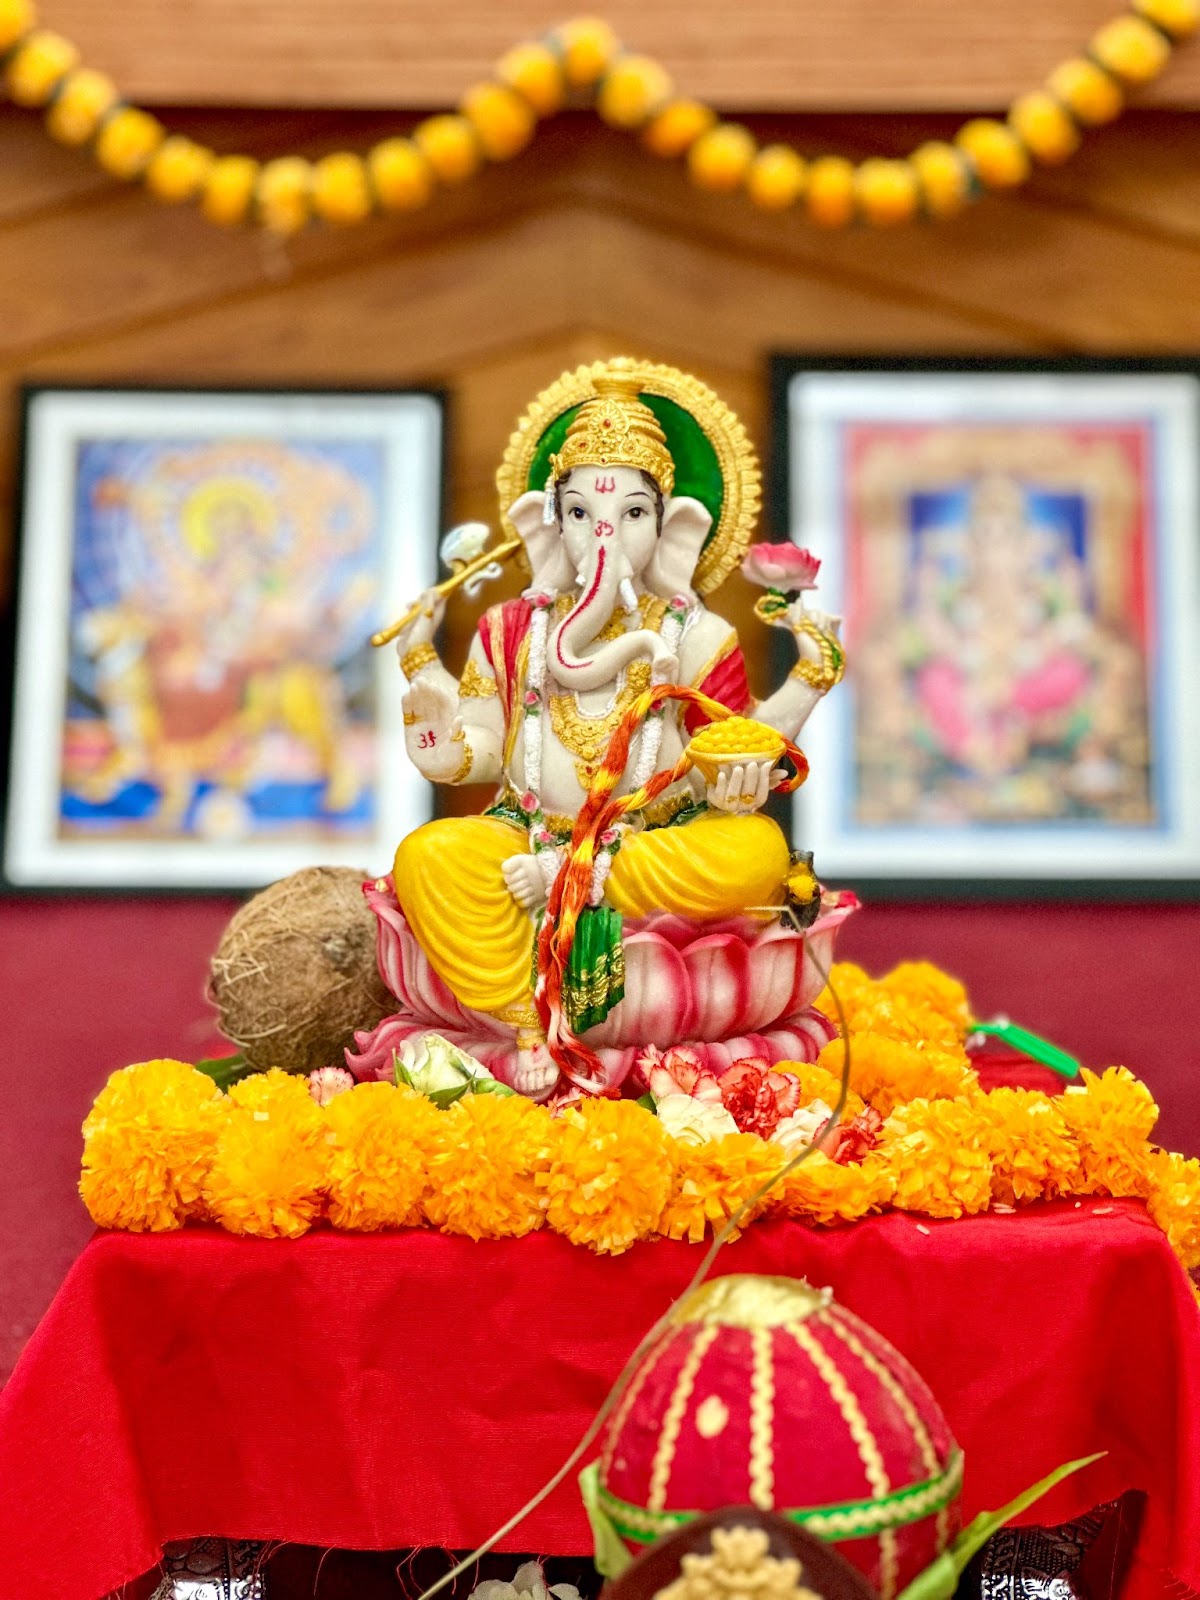 Bhagvan Shri Ganesha – The remover of all obstacles